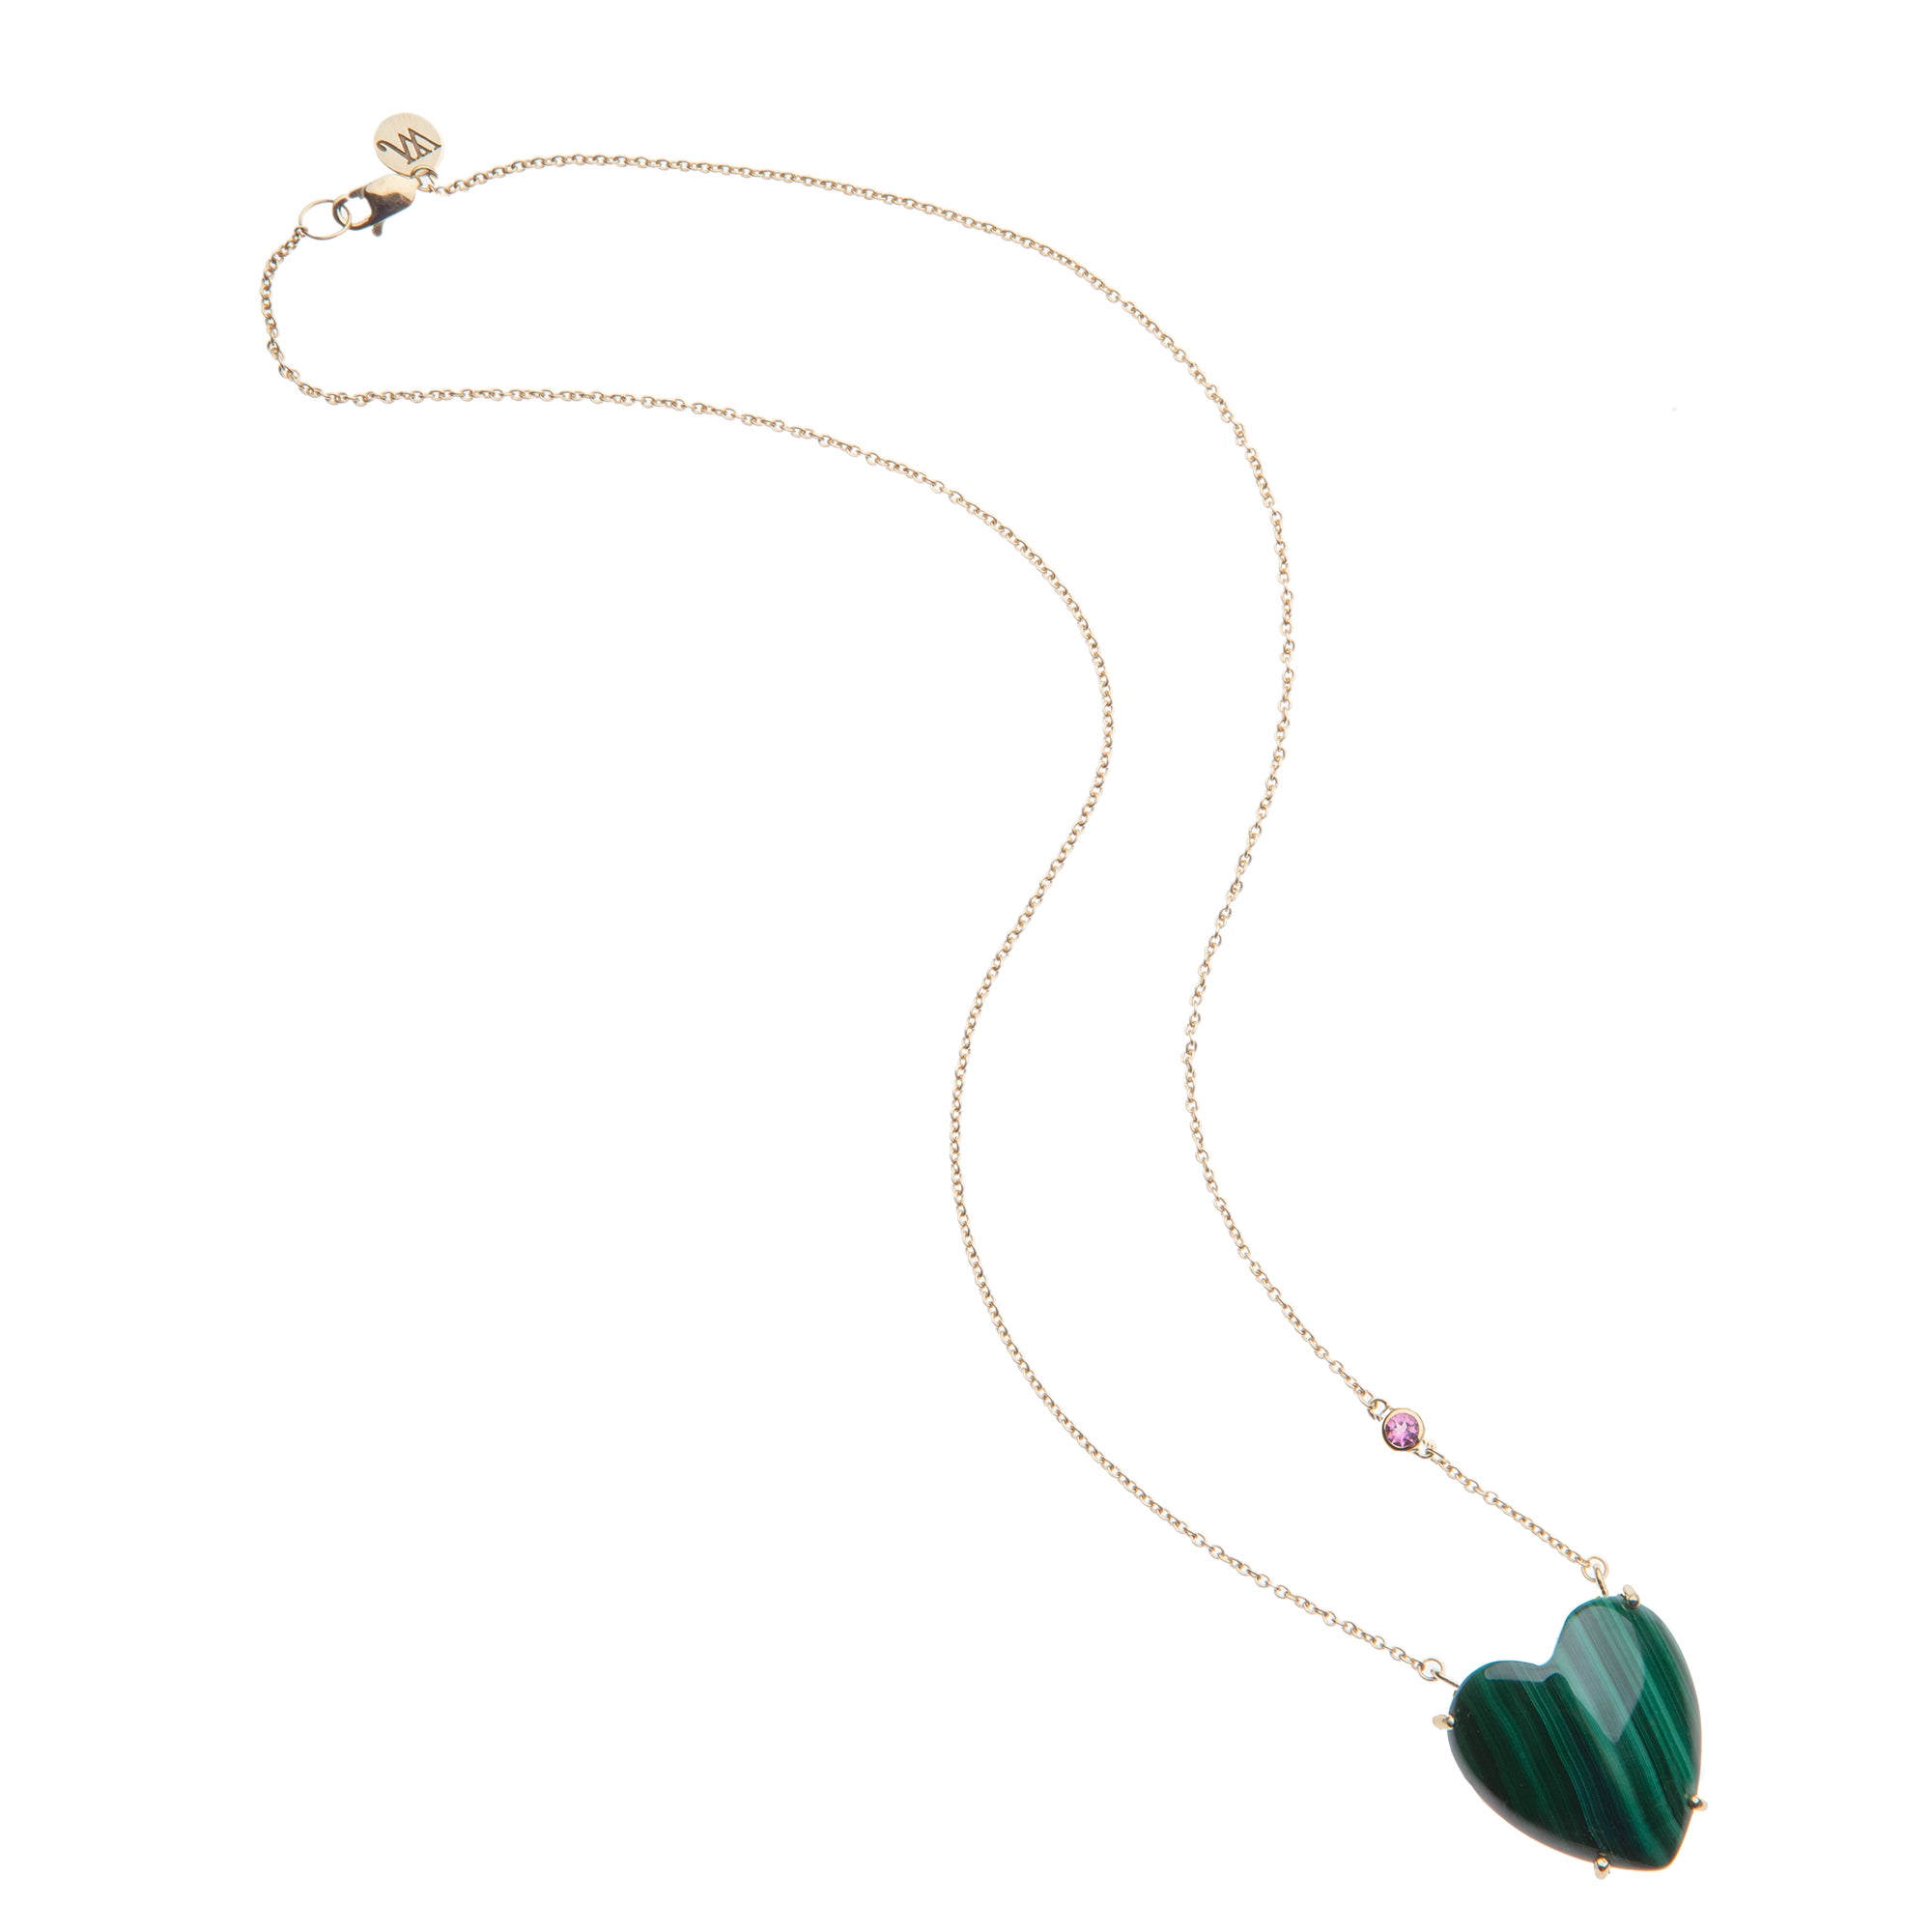 LOVE Malachite Carved Heart Necklace with Gold Setting SALE